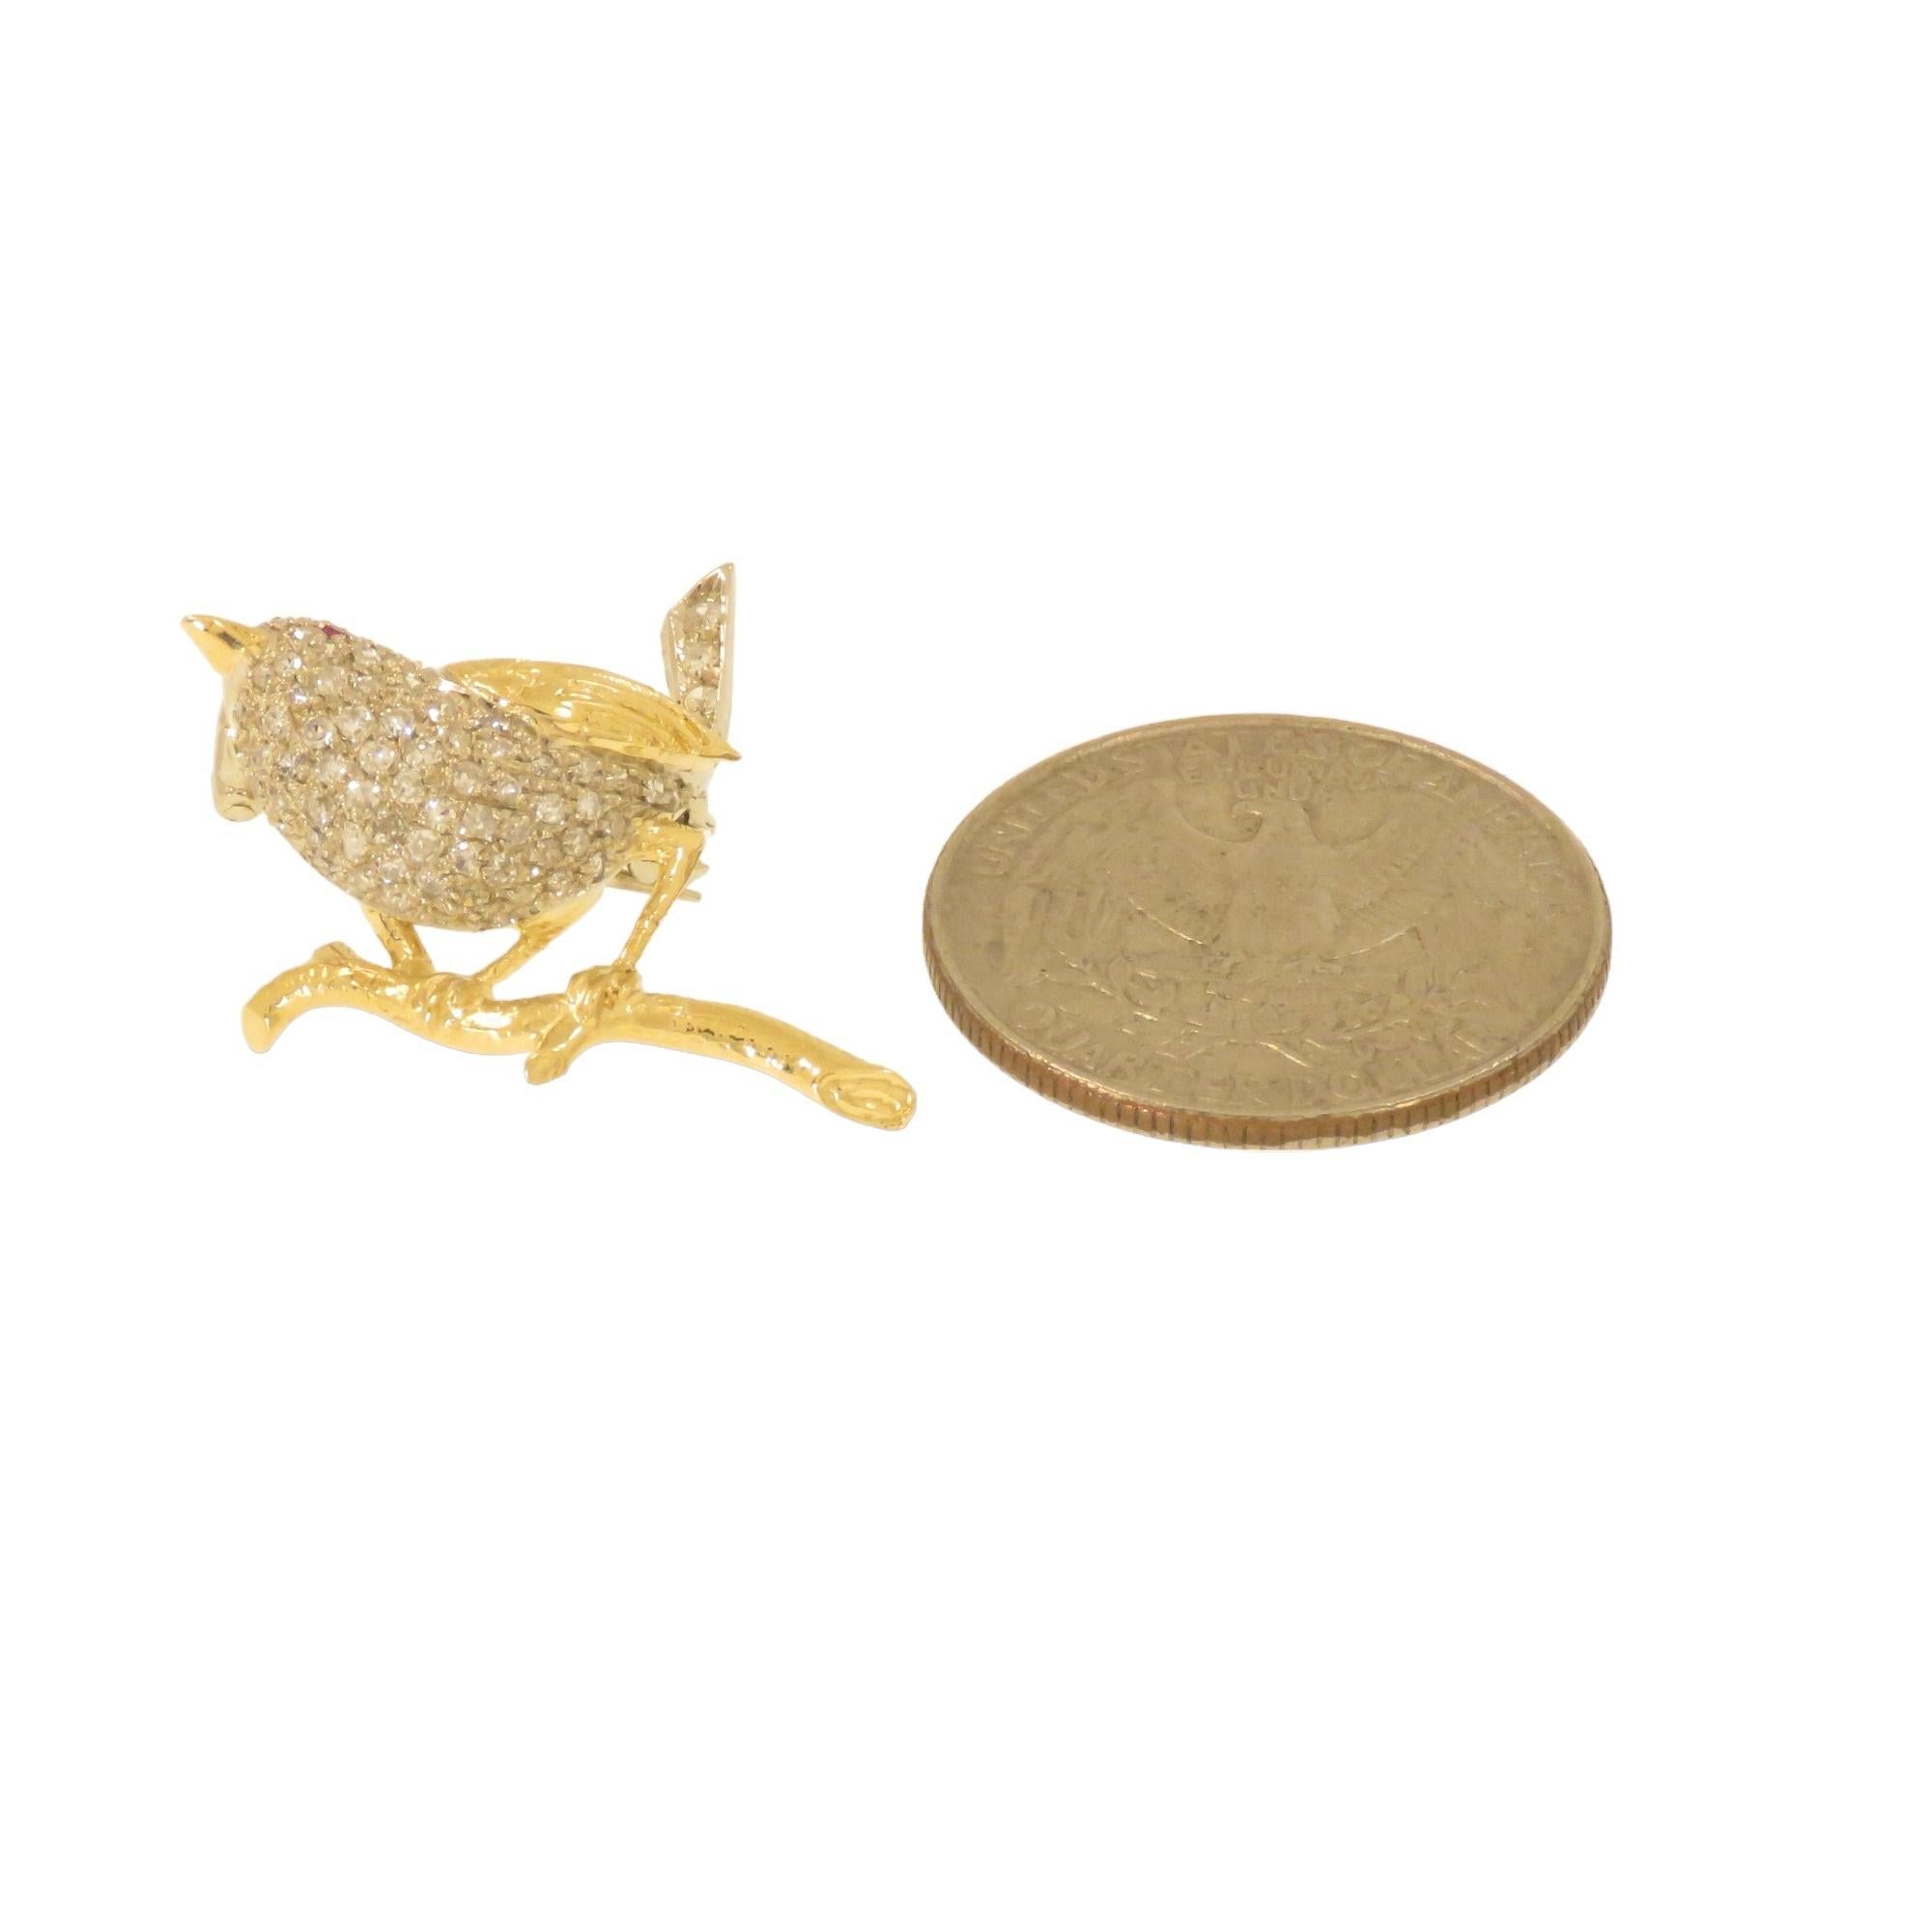 Gold and Diamond Brooch in the Shape of a Bird 1